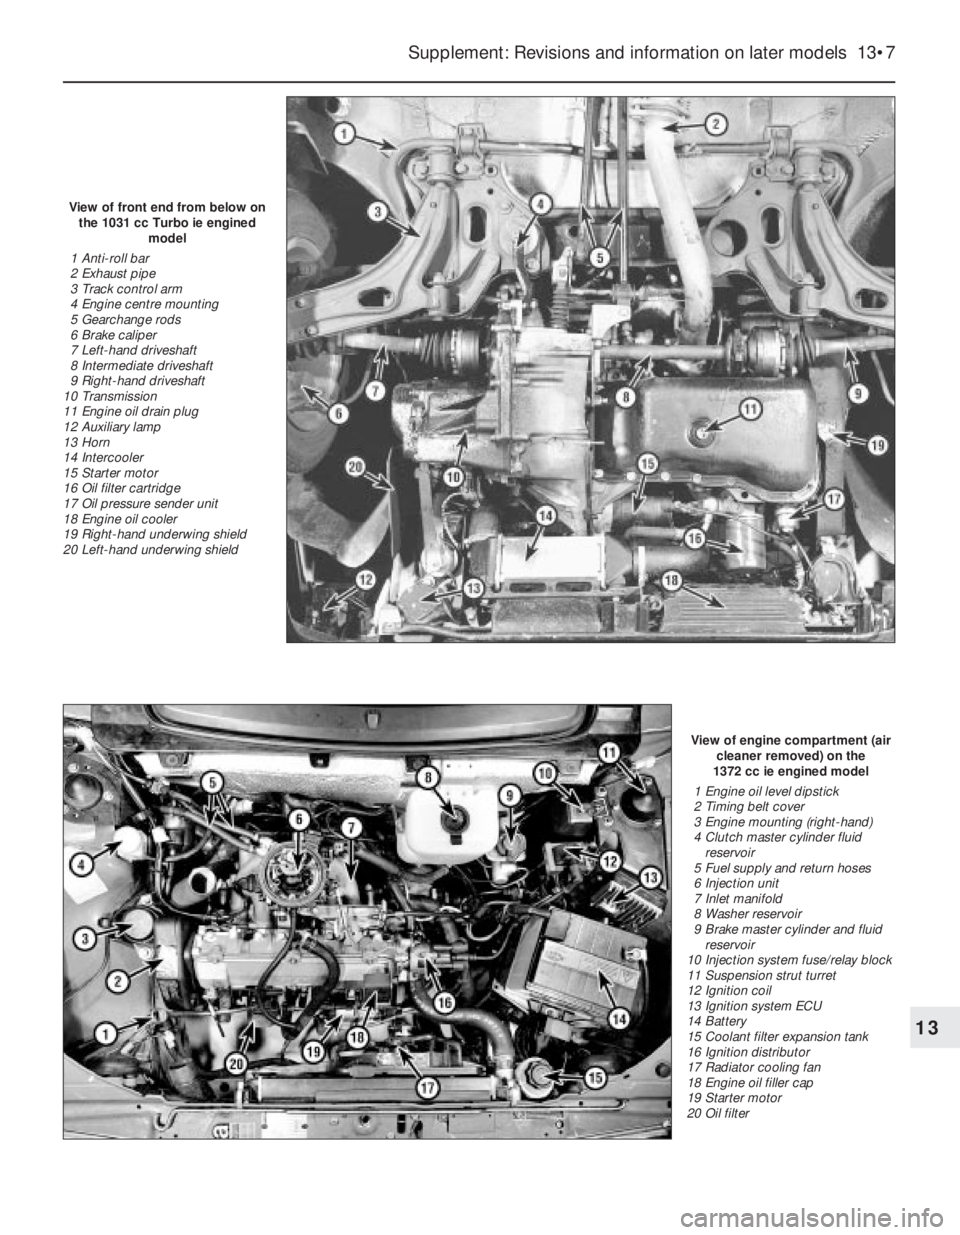 FIAT UNO 1983  Service Owners Manual Supplement: Revisions and information on later models  13•7
View of engine compartment (air
cleaner removed) on the 
1372 cc ie engined model
1 Engine oil level dipstick
2 Timing belt cover
3 Engine